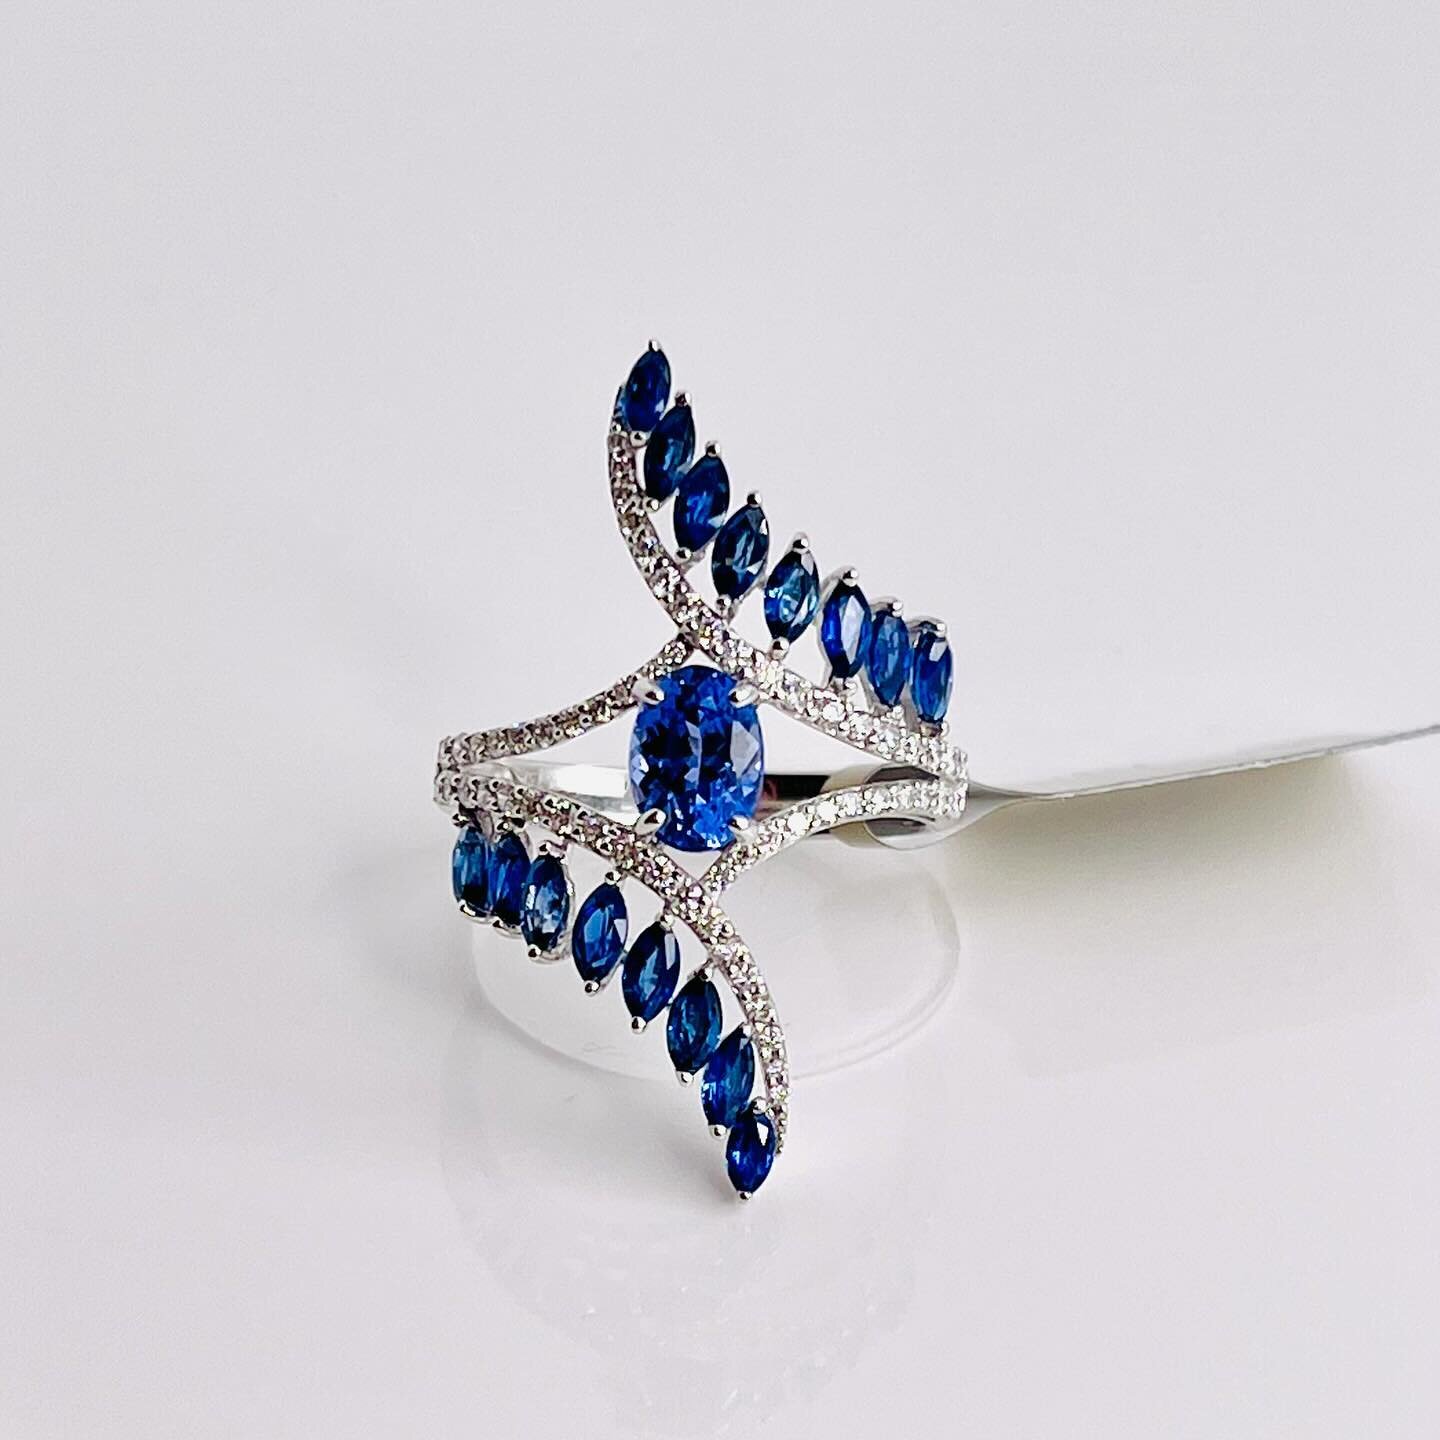 18 karat white gold Tanzanite ring with Sapphire and Diamonds 

Need more information?
Please message us.

#finejewel #gold #earring #ring #necklace #everyday
#18k #18kgold #18kwhitegold #whitegold #jewellery #jewelry #canadianmade #craftsman
#love #